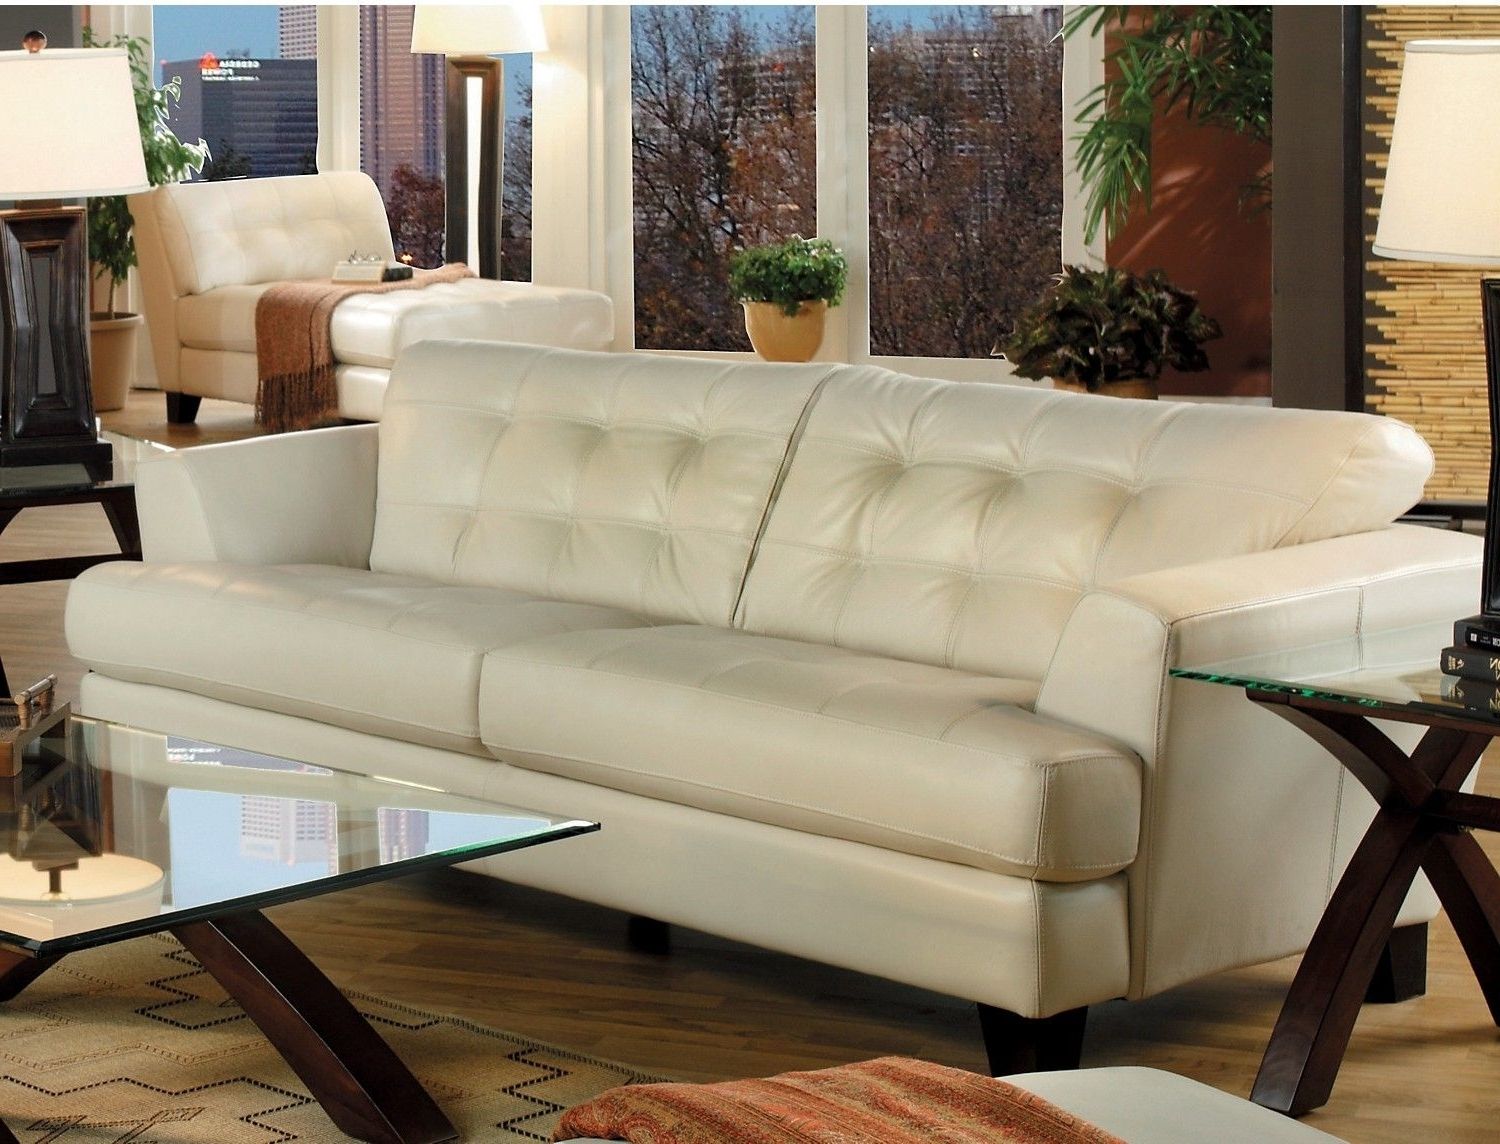 Well Known Sectional Sofas At The Brick With Main Floor (View 17 of 20)